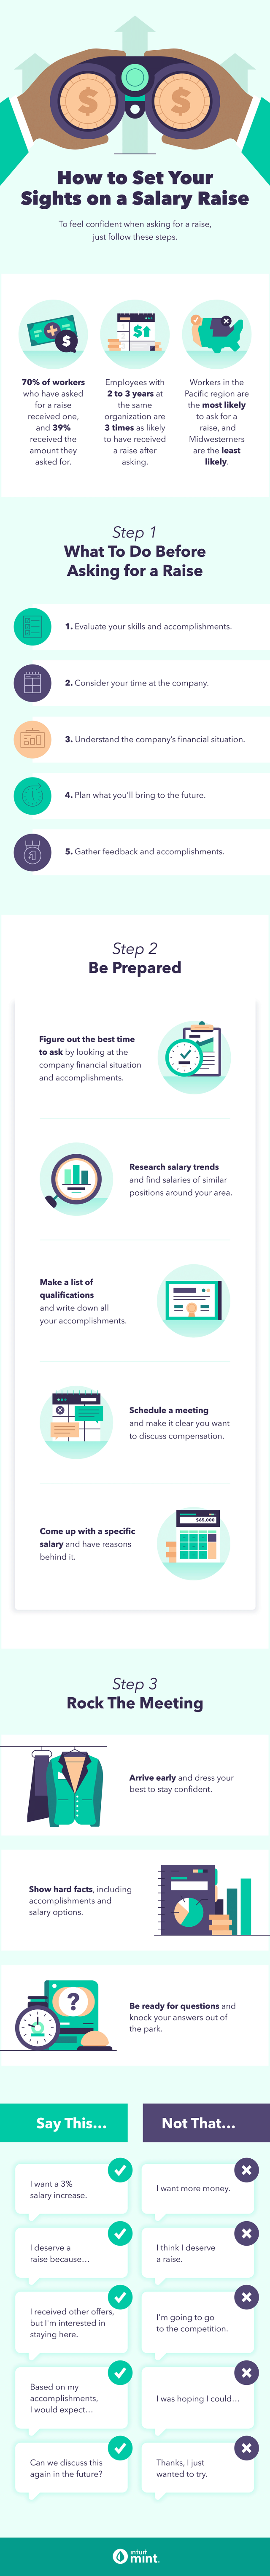 An infographic goes over tips on how to ask for a raise